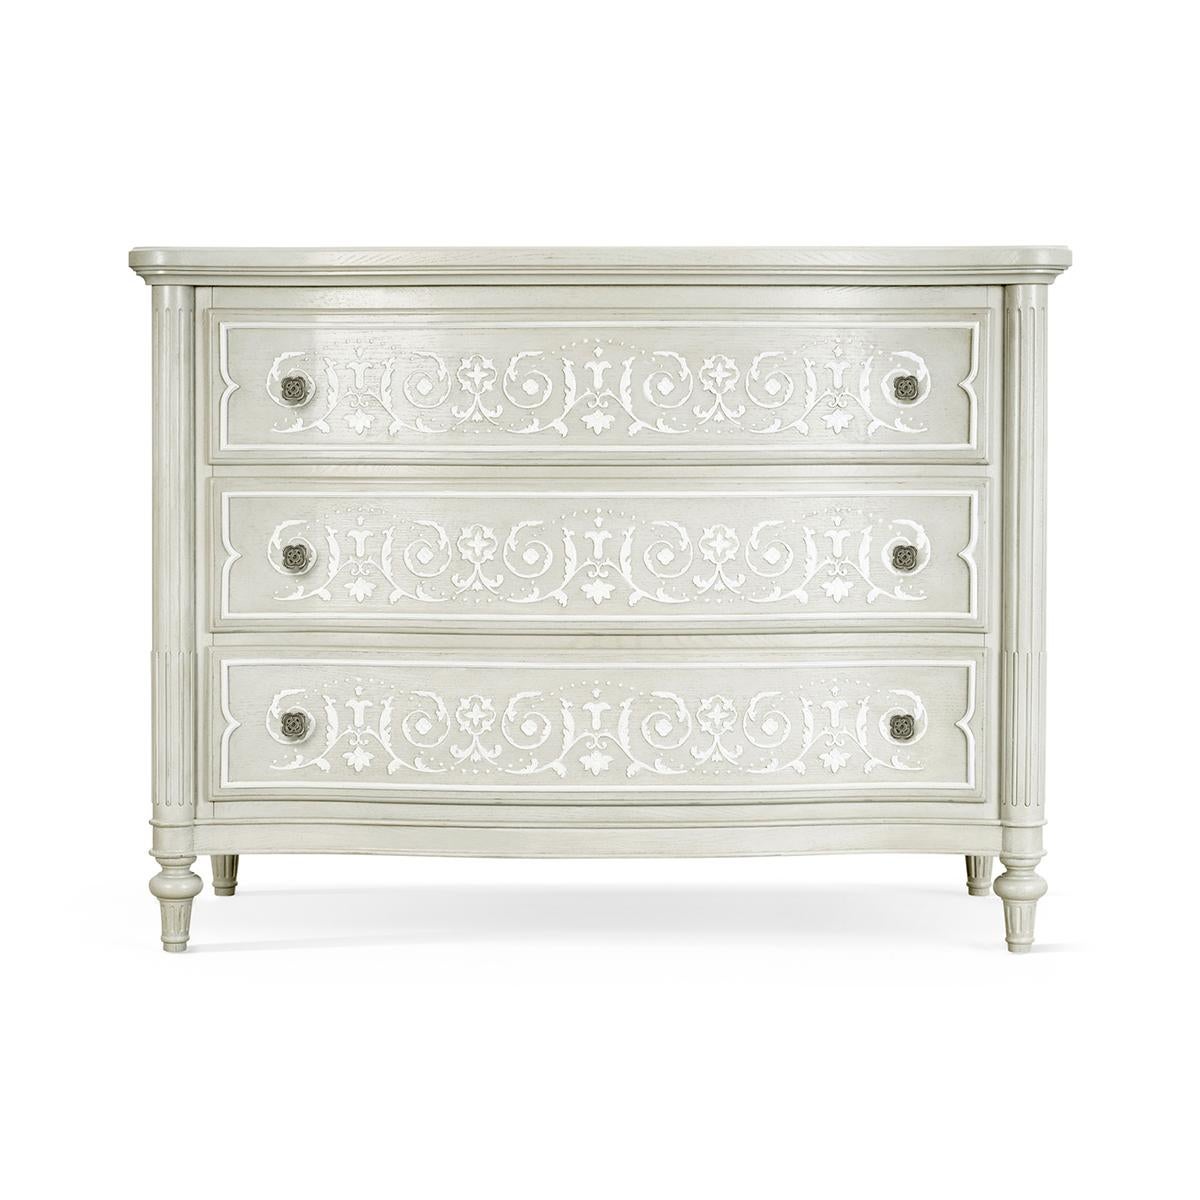 French Gray Painted Commode, embellished with an artful hand carved floral motif across serpentine drawer fronts between classically lined stop-fluted columns balanced on turned and tapered feet. 

Dimensions: 50 1/8